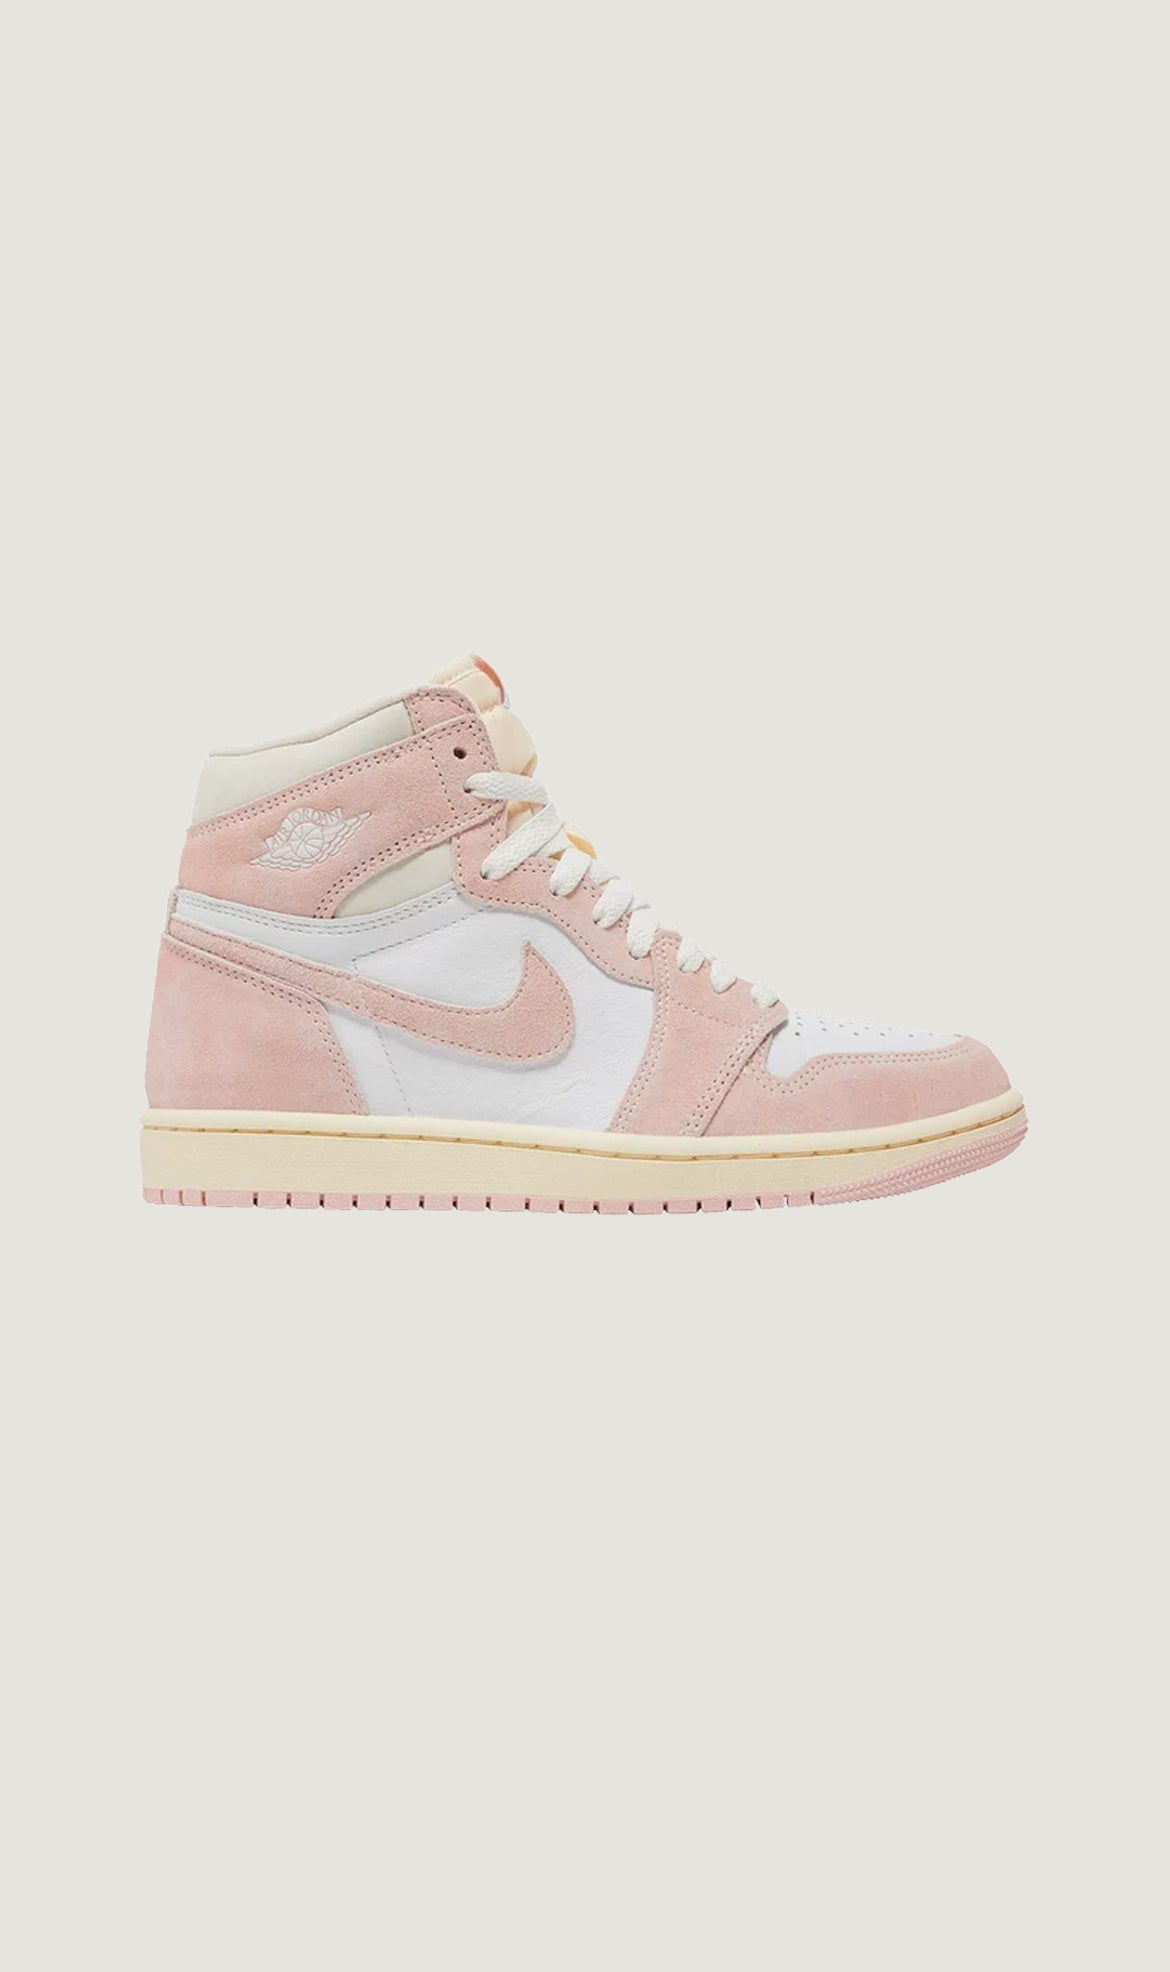 Load image into Gallery viewer, WMNS AIR JORDAN 1 RETRO HIGH OG - WASHED PINK
